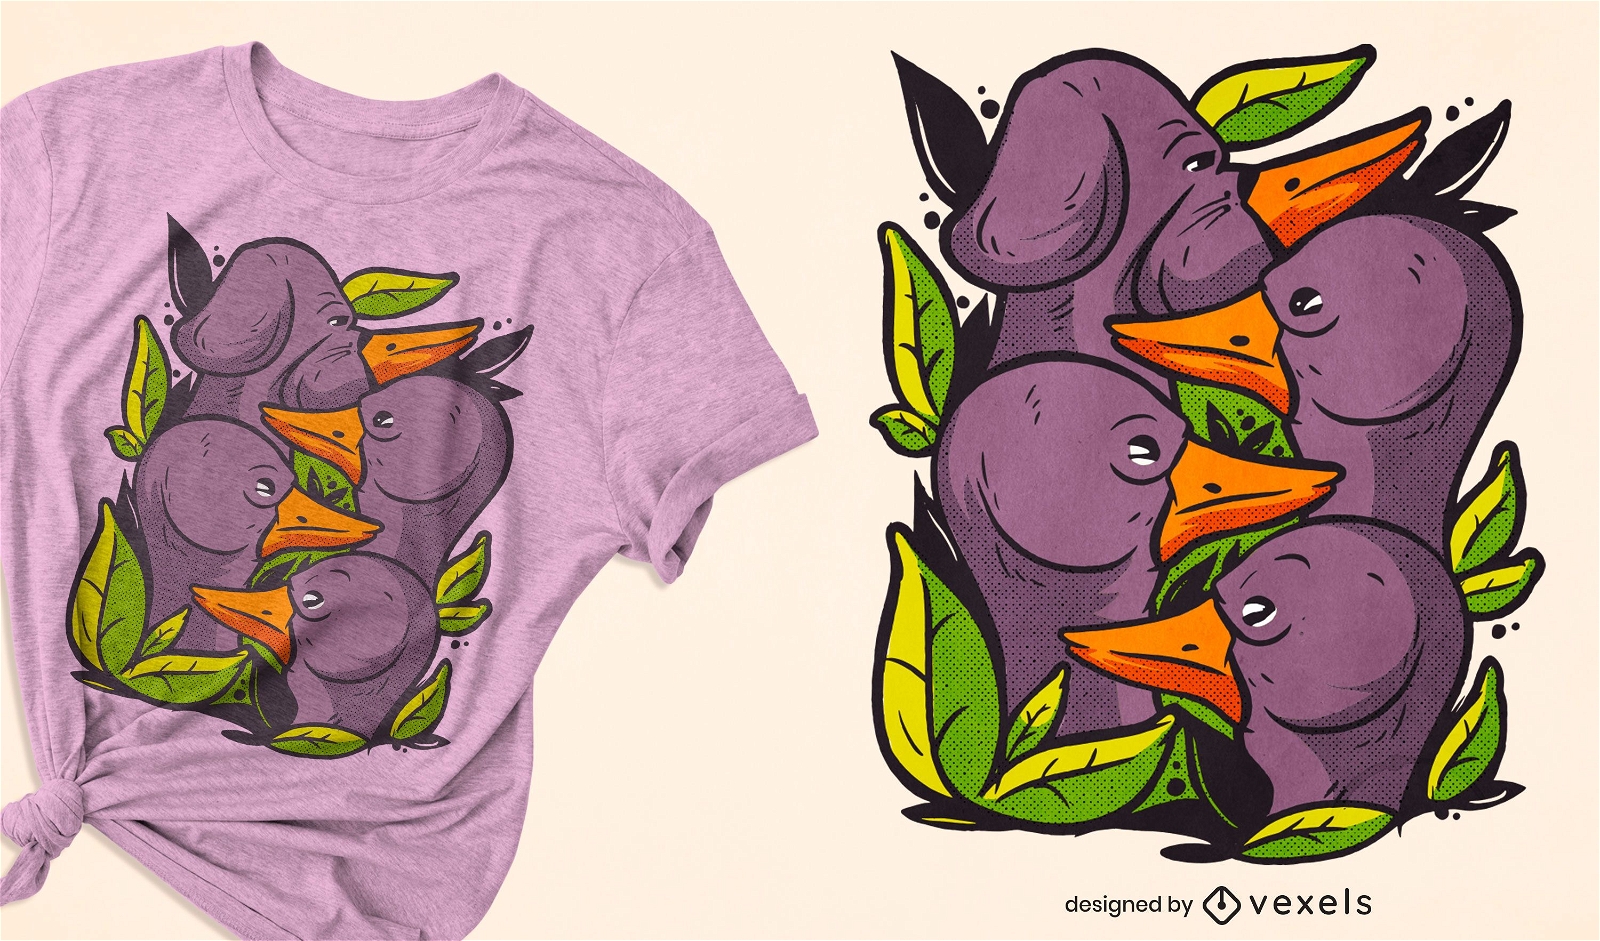 Dog camouflage with ducks t-shirt design